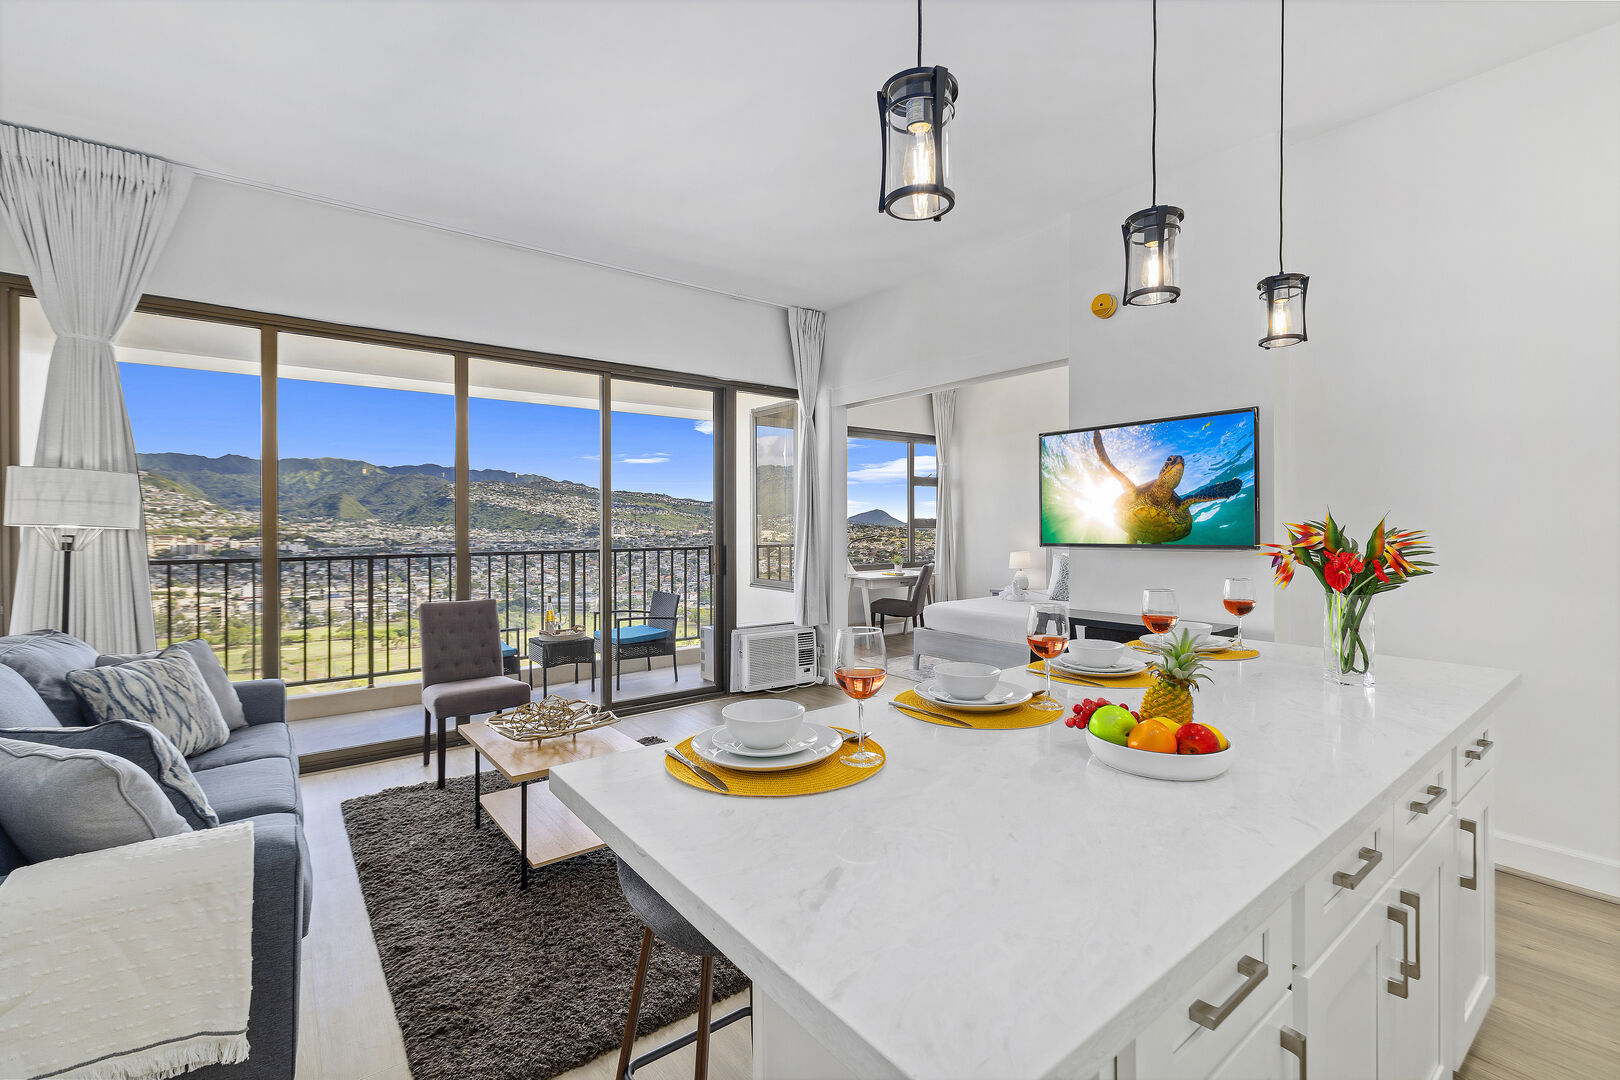 Dining area and countertop with beautiful mountain views.